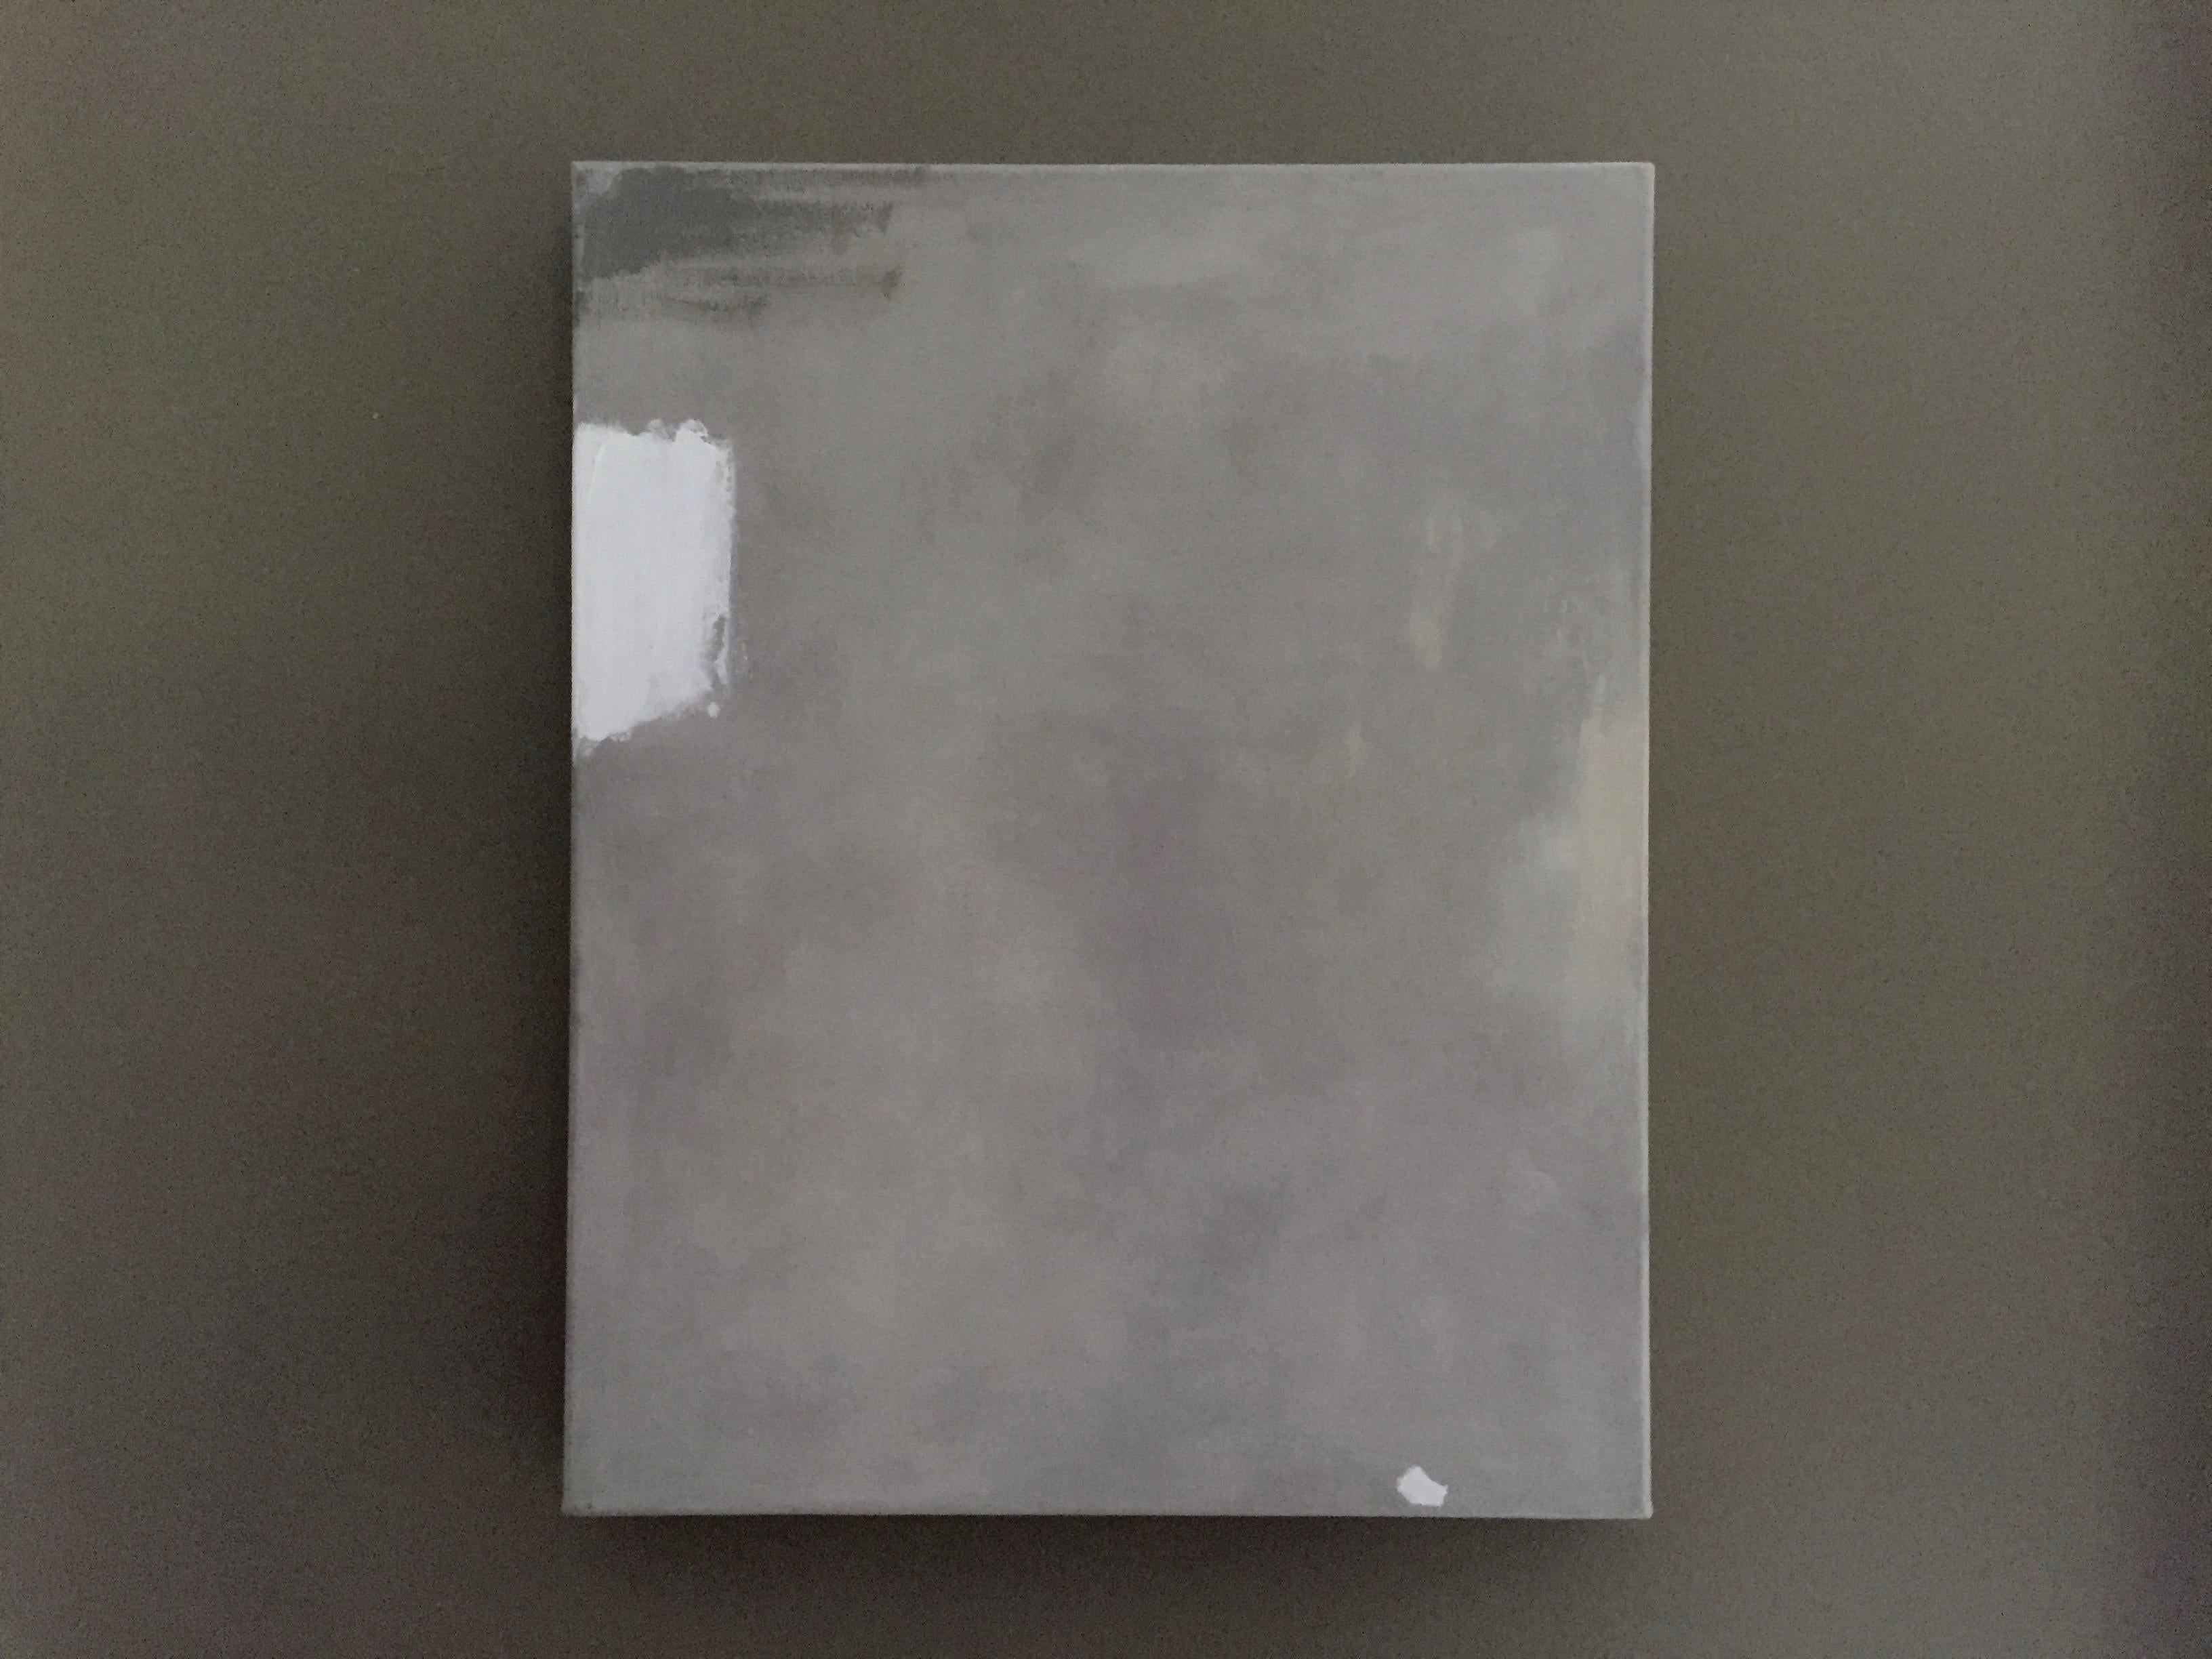 This contemporary minimal abstract painting puts emphasis on simplifying the composition. Tone on tone greys builds up a subtle texture with a single, thick white brush stroke commanding attention. Layers of neutrals move the eye around, making for